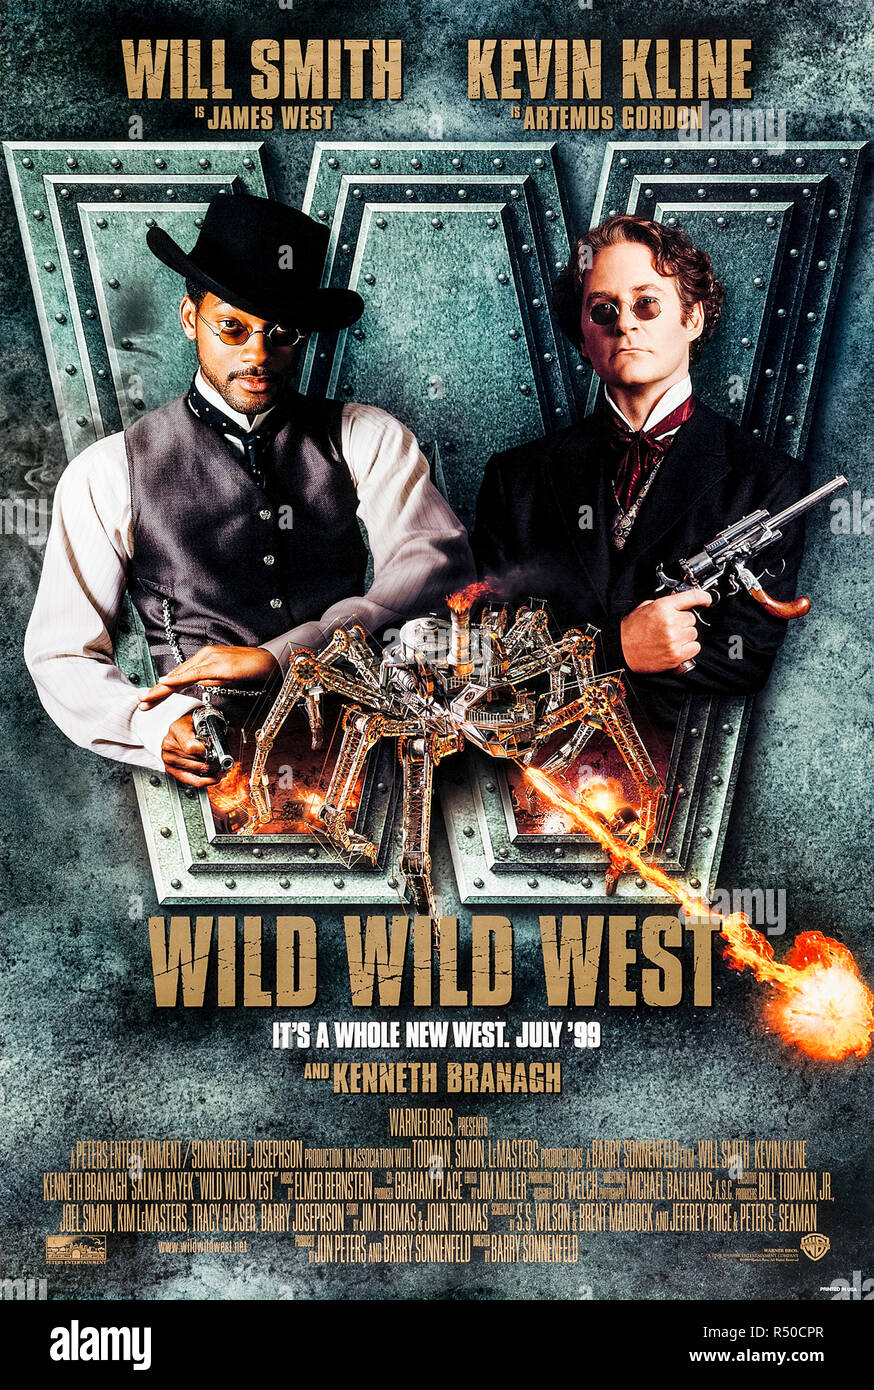 Wild Wild West (1999) directed by Barry Sonnenfeld and starring Will Smith, Kevin Kline, Kenneth Branagh and Salma Hayek. Two hired guns go after a renegade inventor trying to assassinate President Ulysses S. Grant. Stock Photo